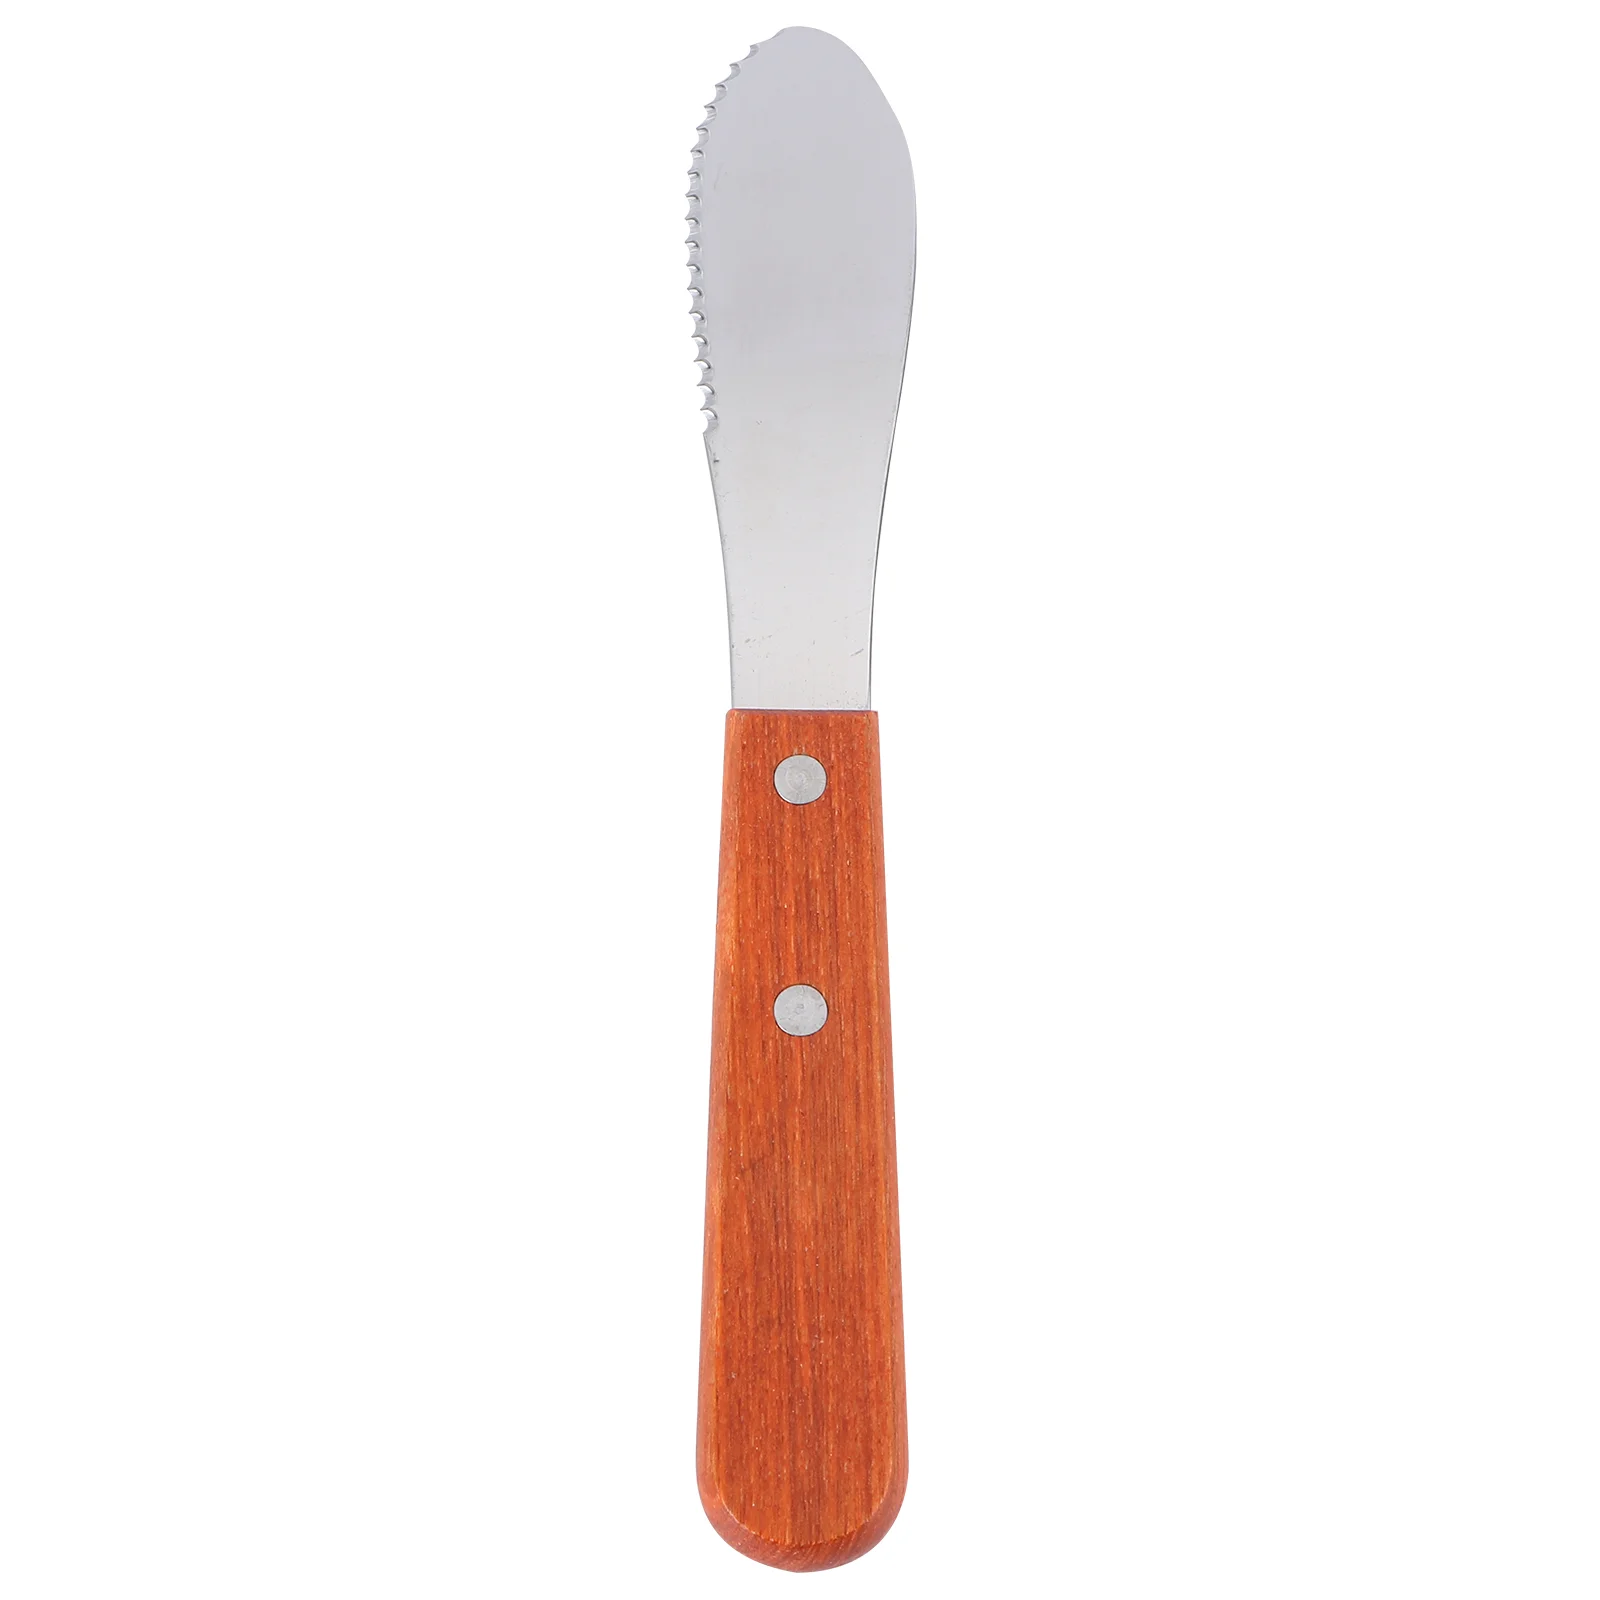 

1pc Stainless Steel Serrated Butter Wooden Handle Cream Spatula Cheese Spreader for Cake Smoother Pastry